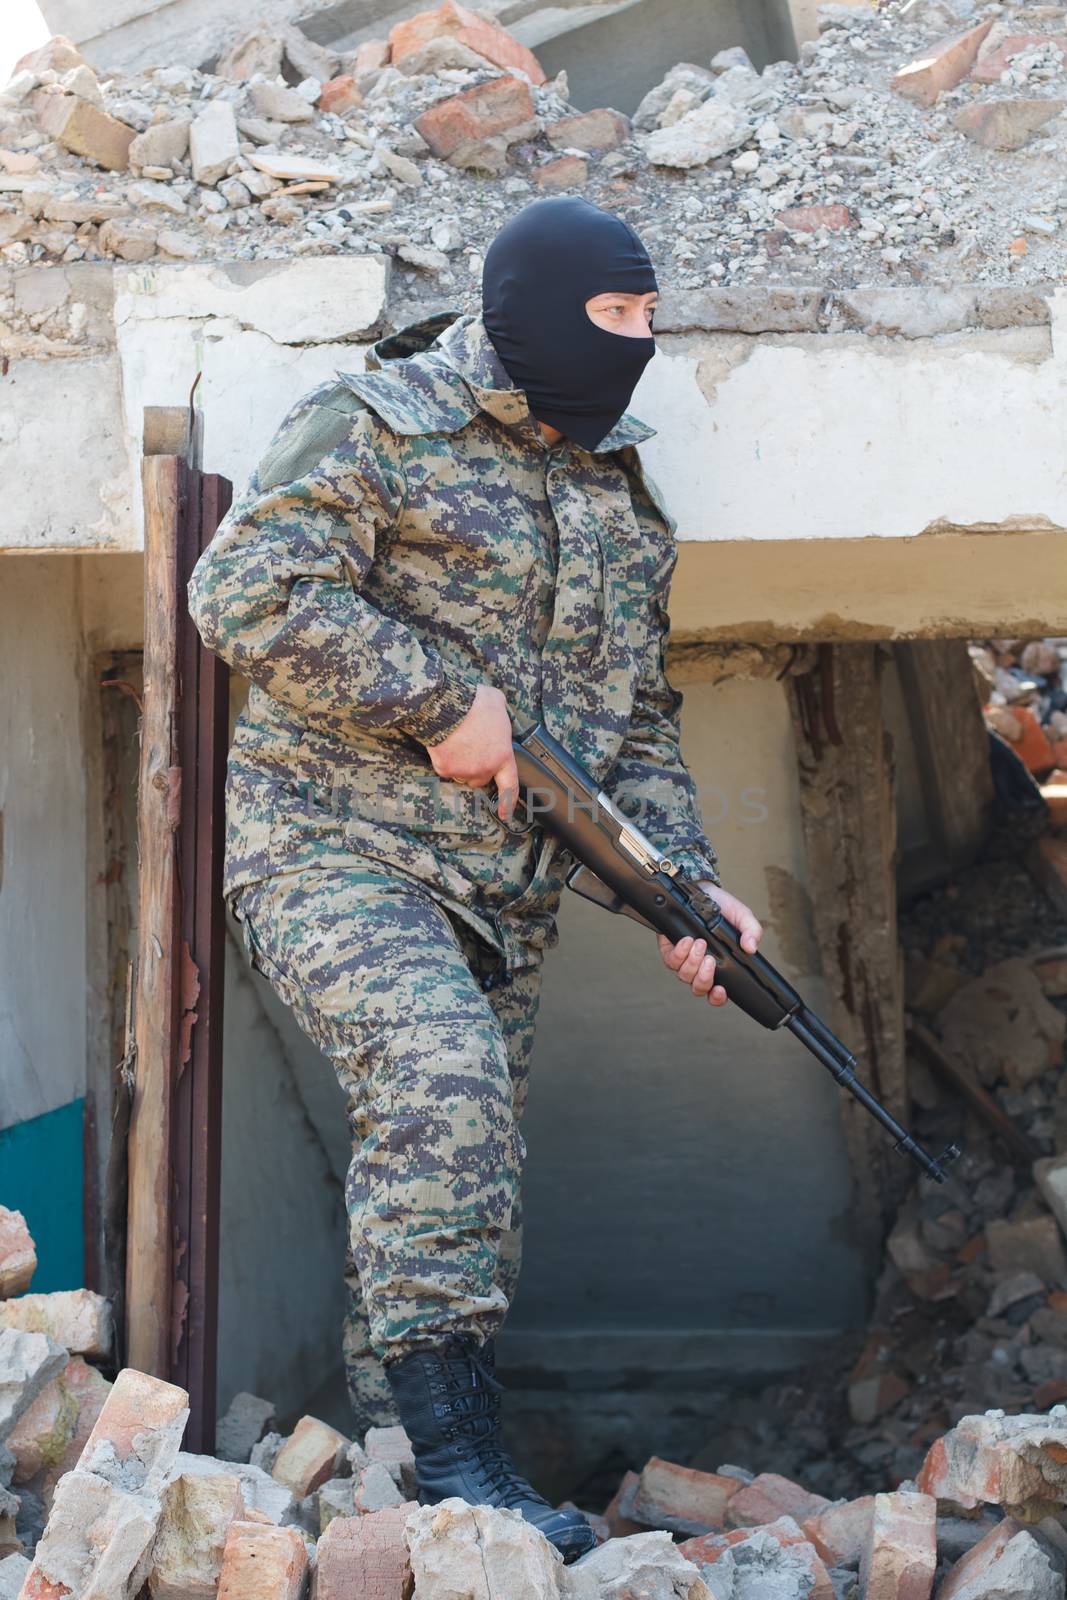 Military camouflage with a rifle on a background of bombed buildings.